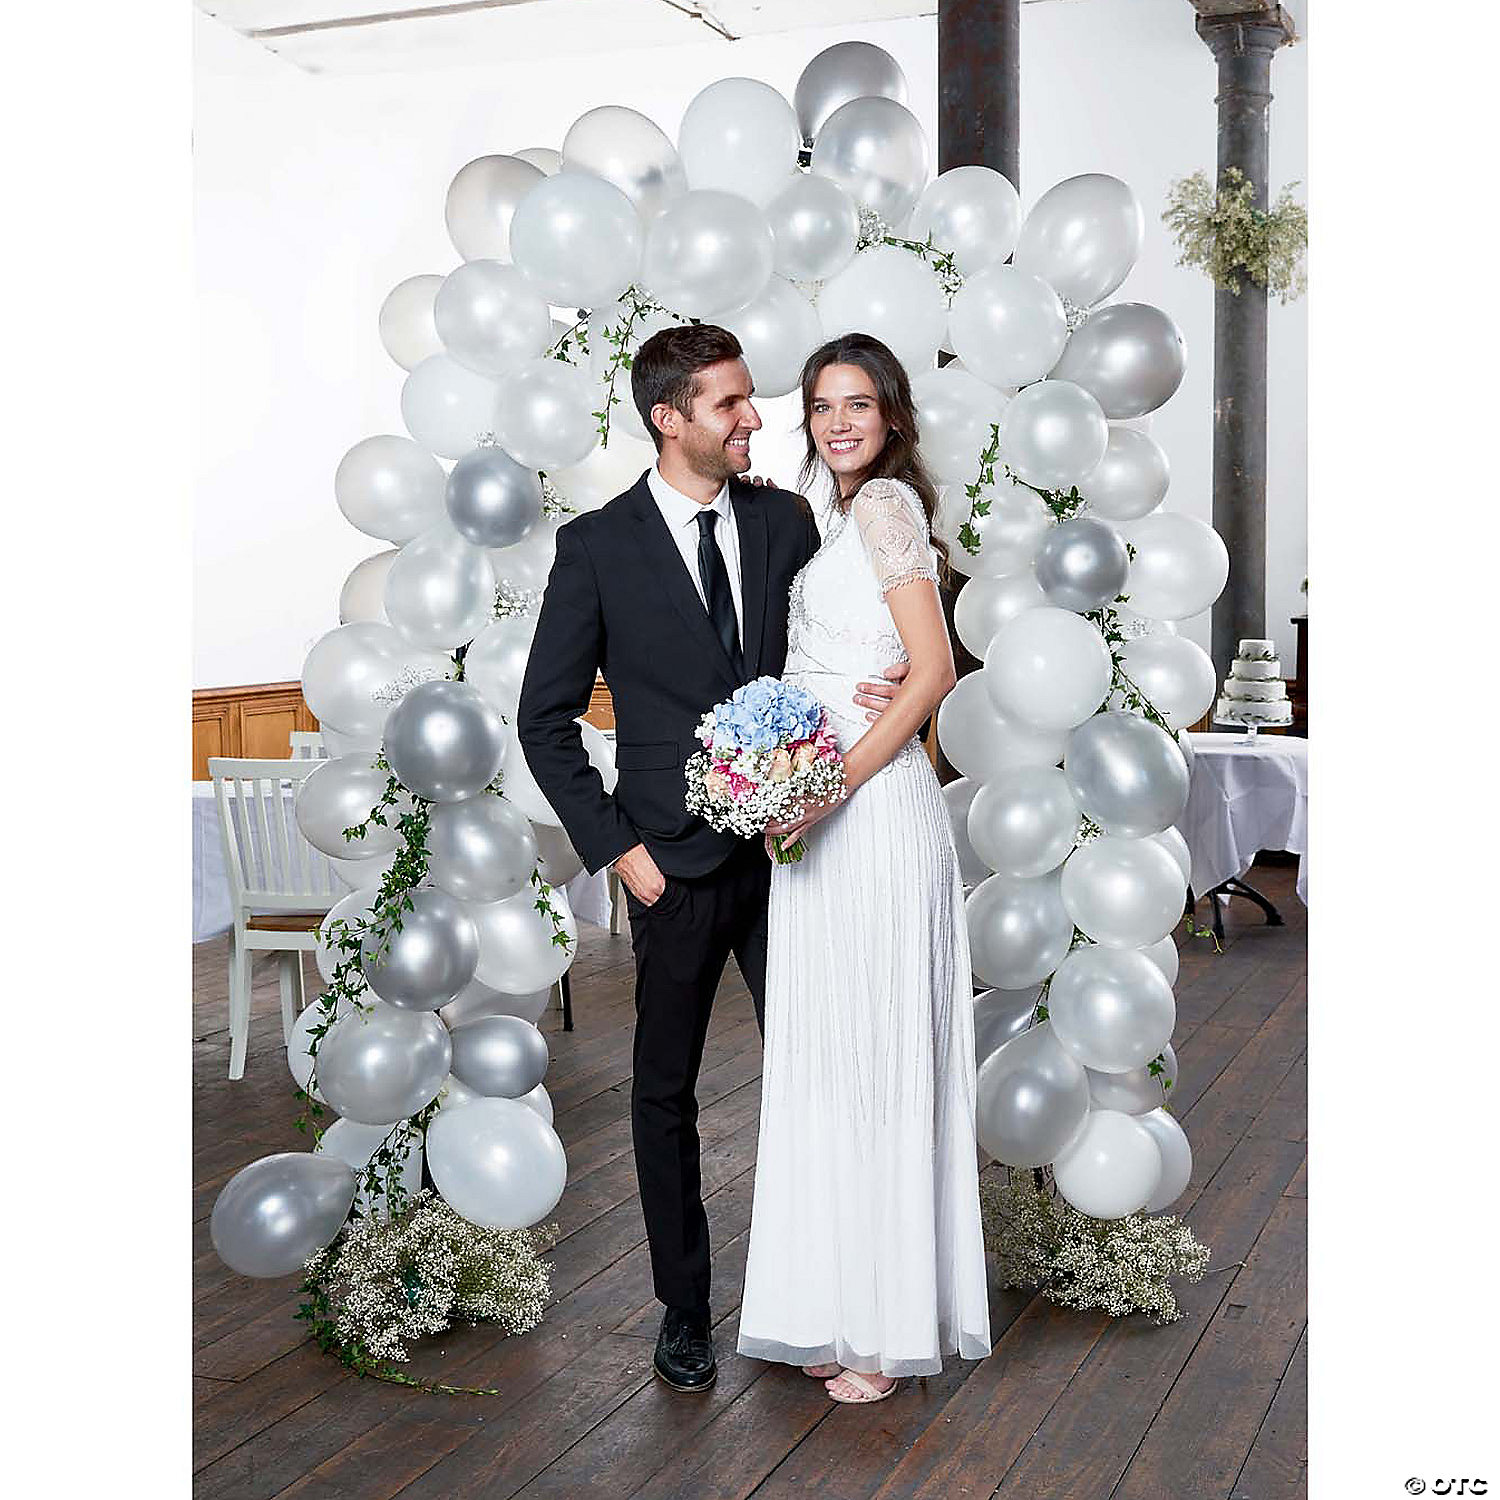 Special Events Balloon Table Arch Set for Birthdays Anniversaries 12-inch Diameter Balloons Weddings Baby Showers Corporate Events Balloon Arch Kit with 40 White and 40 Silver Balloons